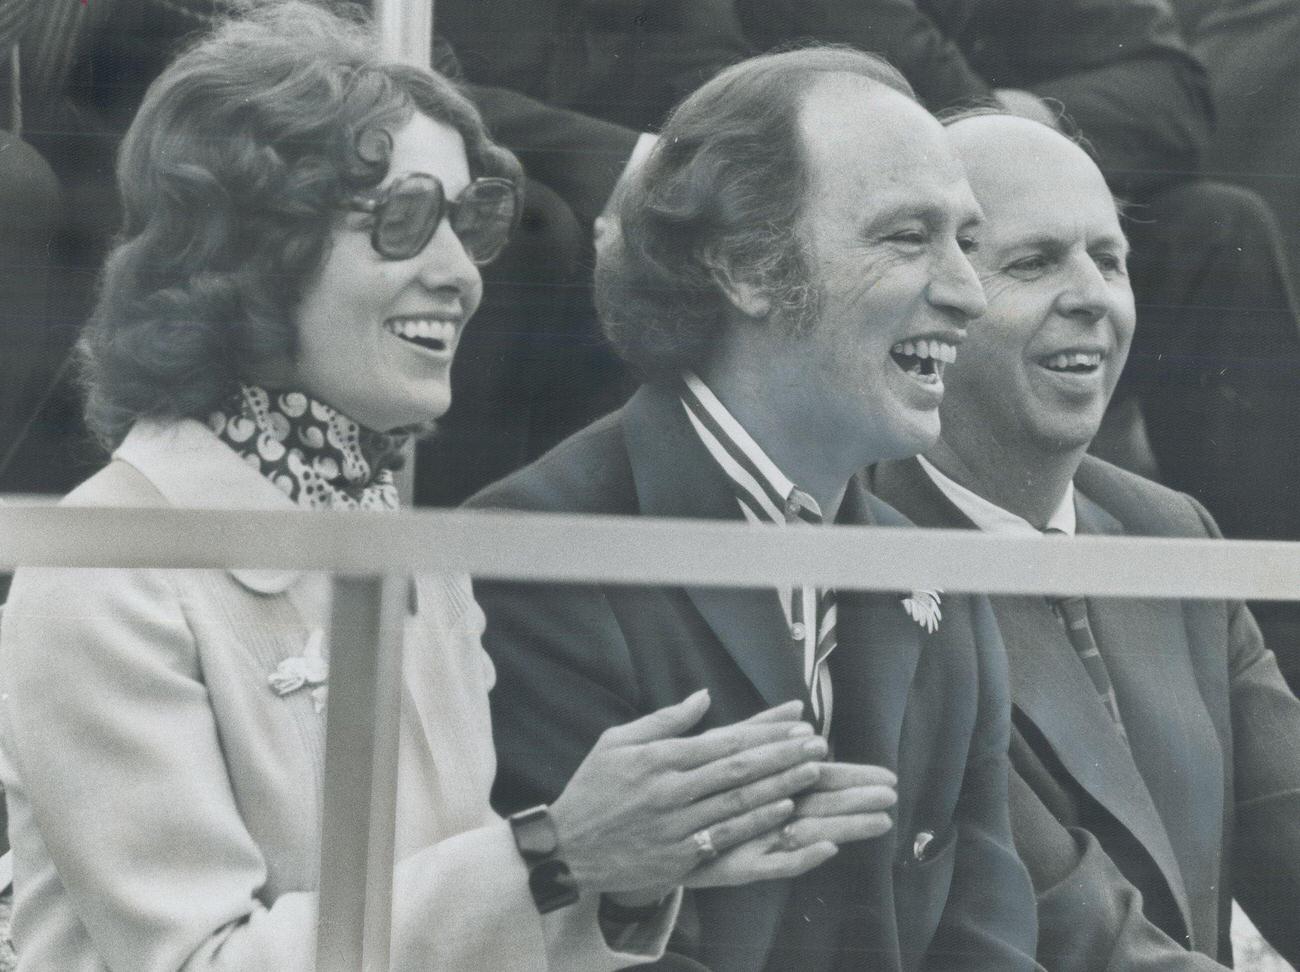 Prime Minister Pierre Trudeau at new whale pool opening, Stanley Park, Vancouver, 1970.